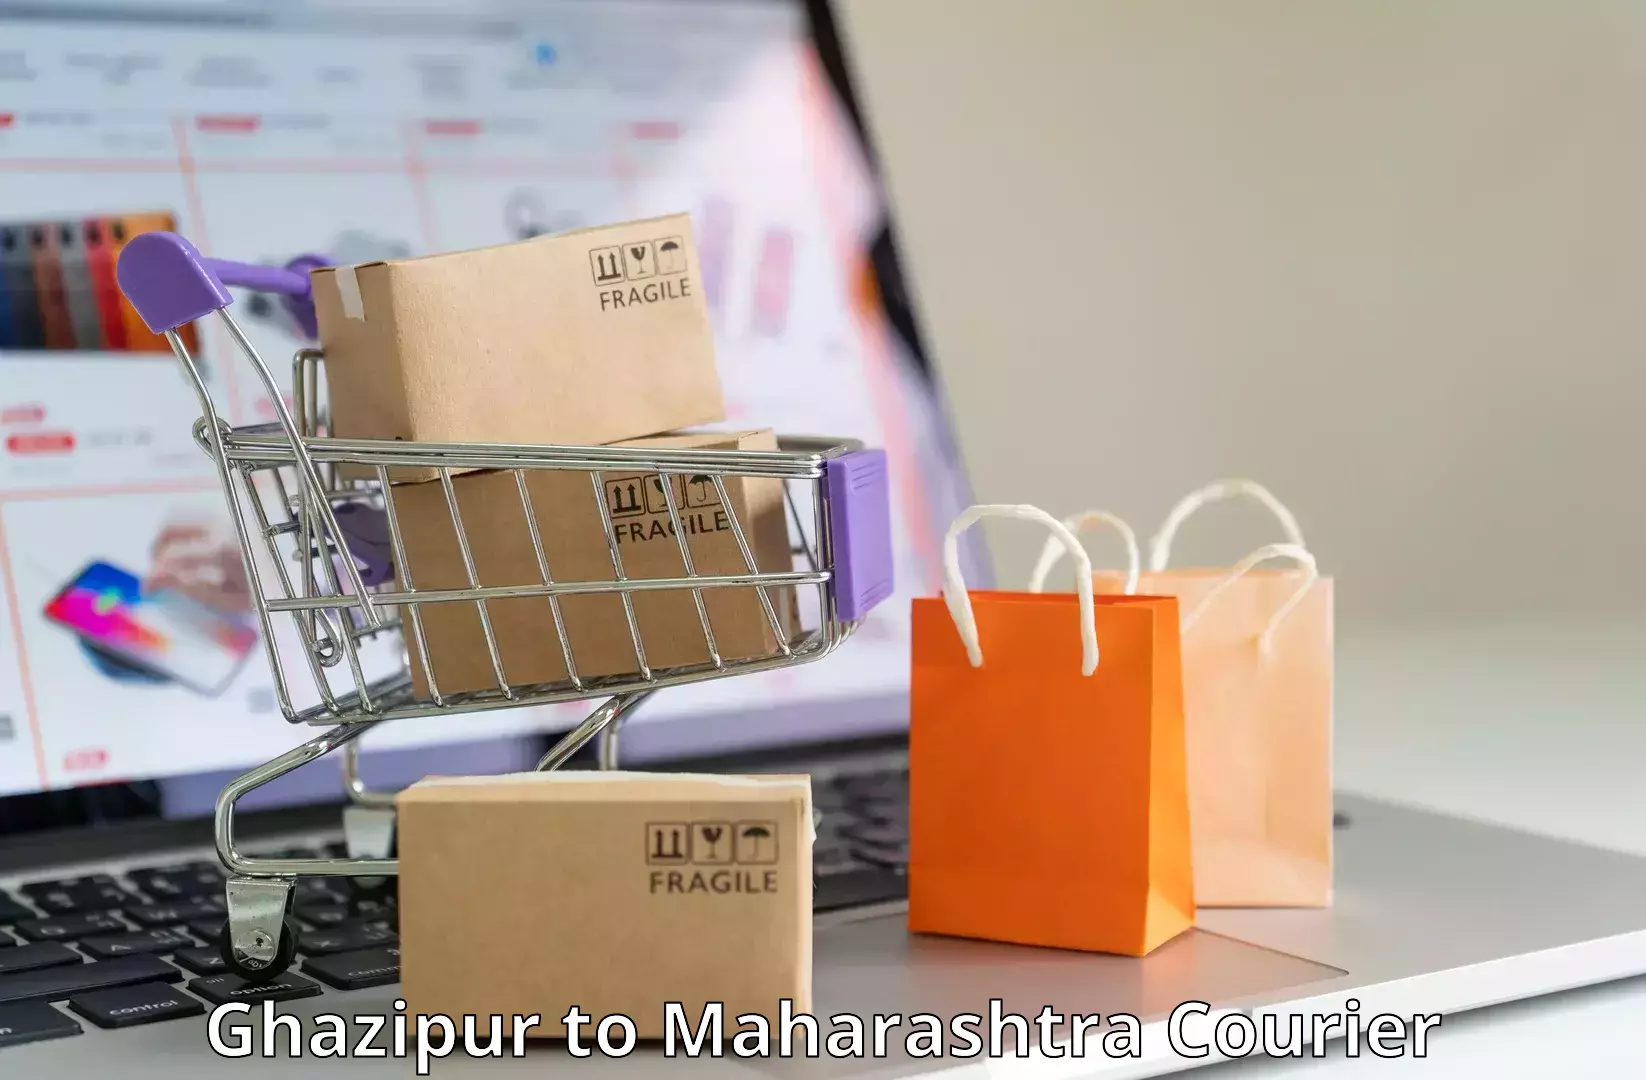 High-speed parcel service Ghazipur to Maharashtra